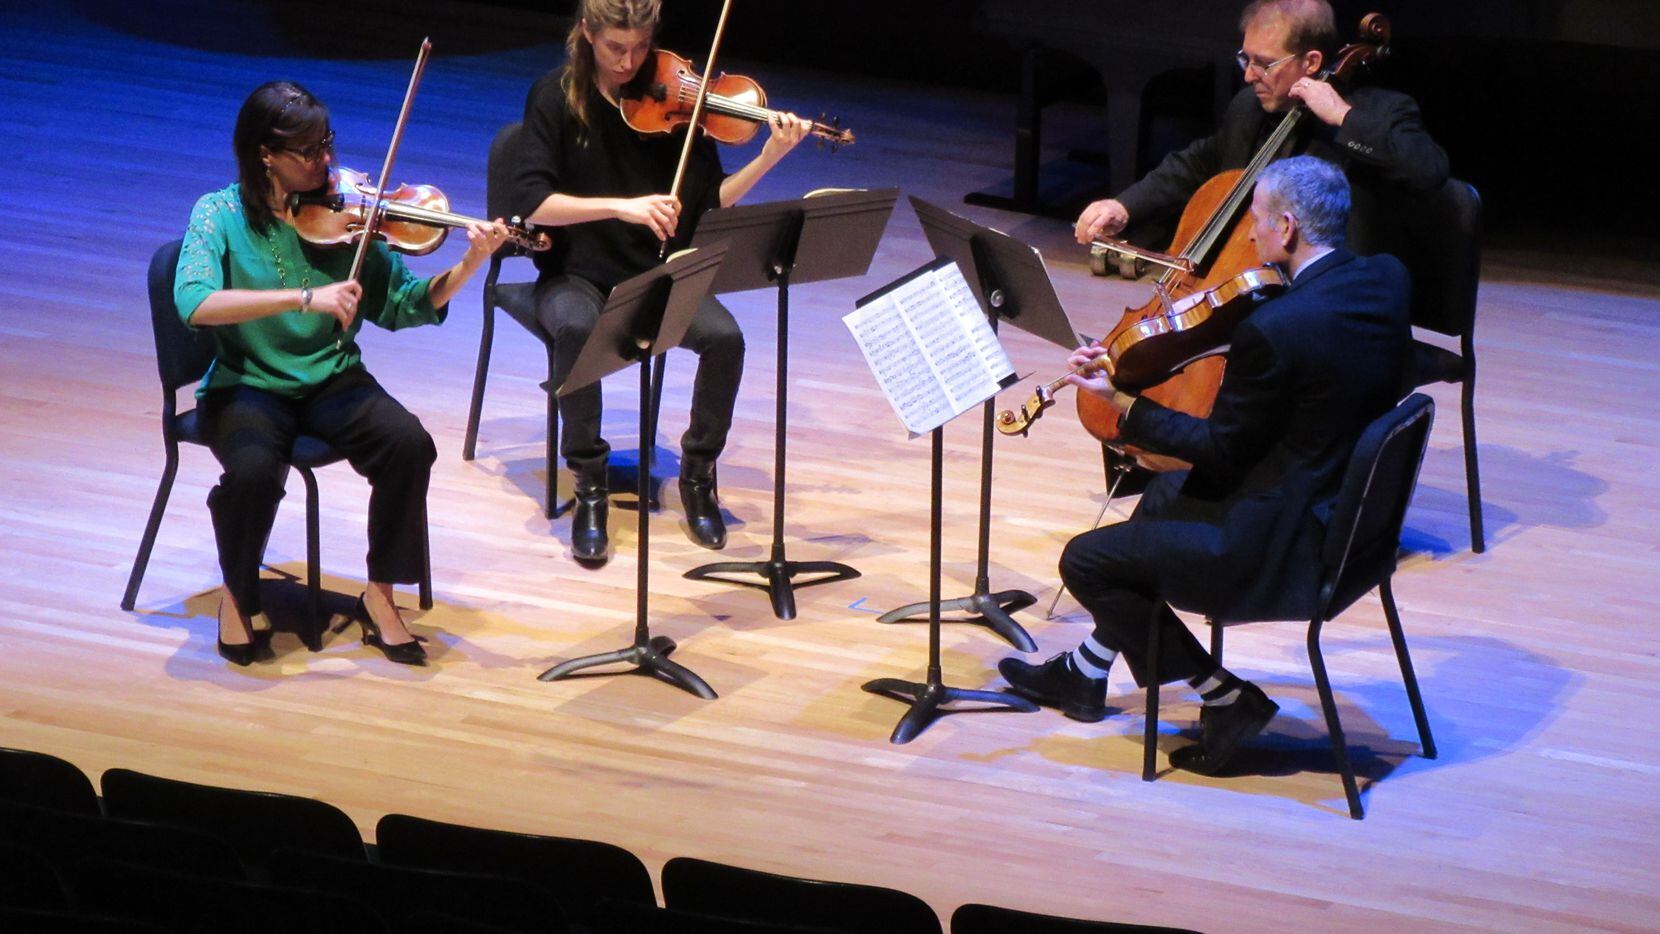 Violinists Maria Schleuning (left) and Lydia Umlauf, violist David Sywak and cellist Jolyon Pegis perform in a Voices of Change concert at Southern Methodist University's Caruth Auditorium on Nov. 24, 2019.